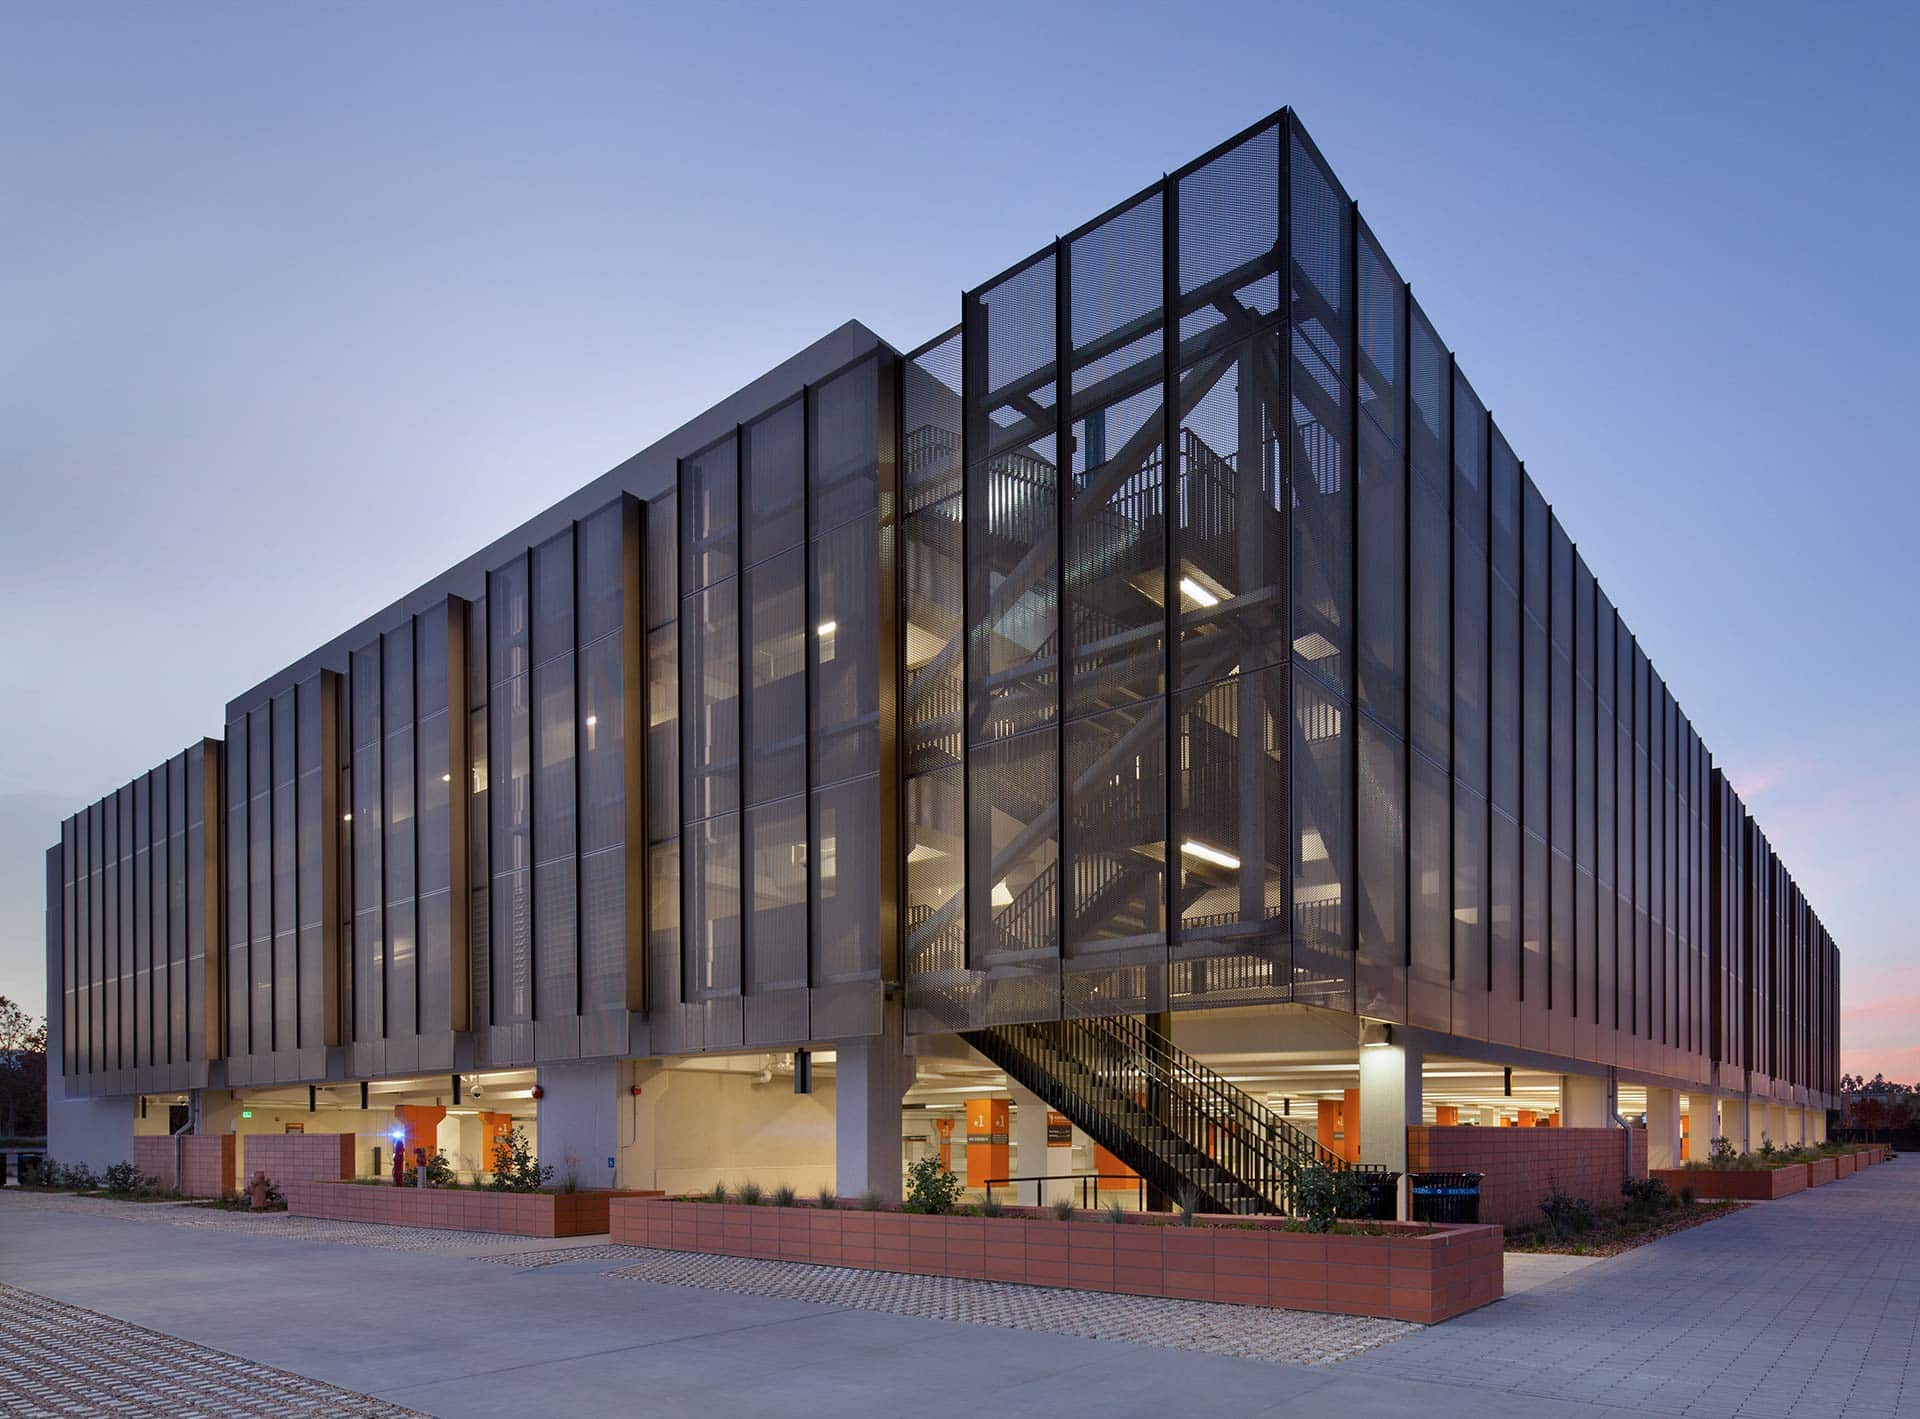 The perforated metal panel screen system at Stanford University Parking Garage.